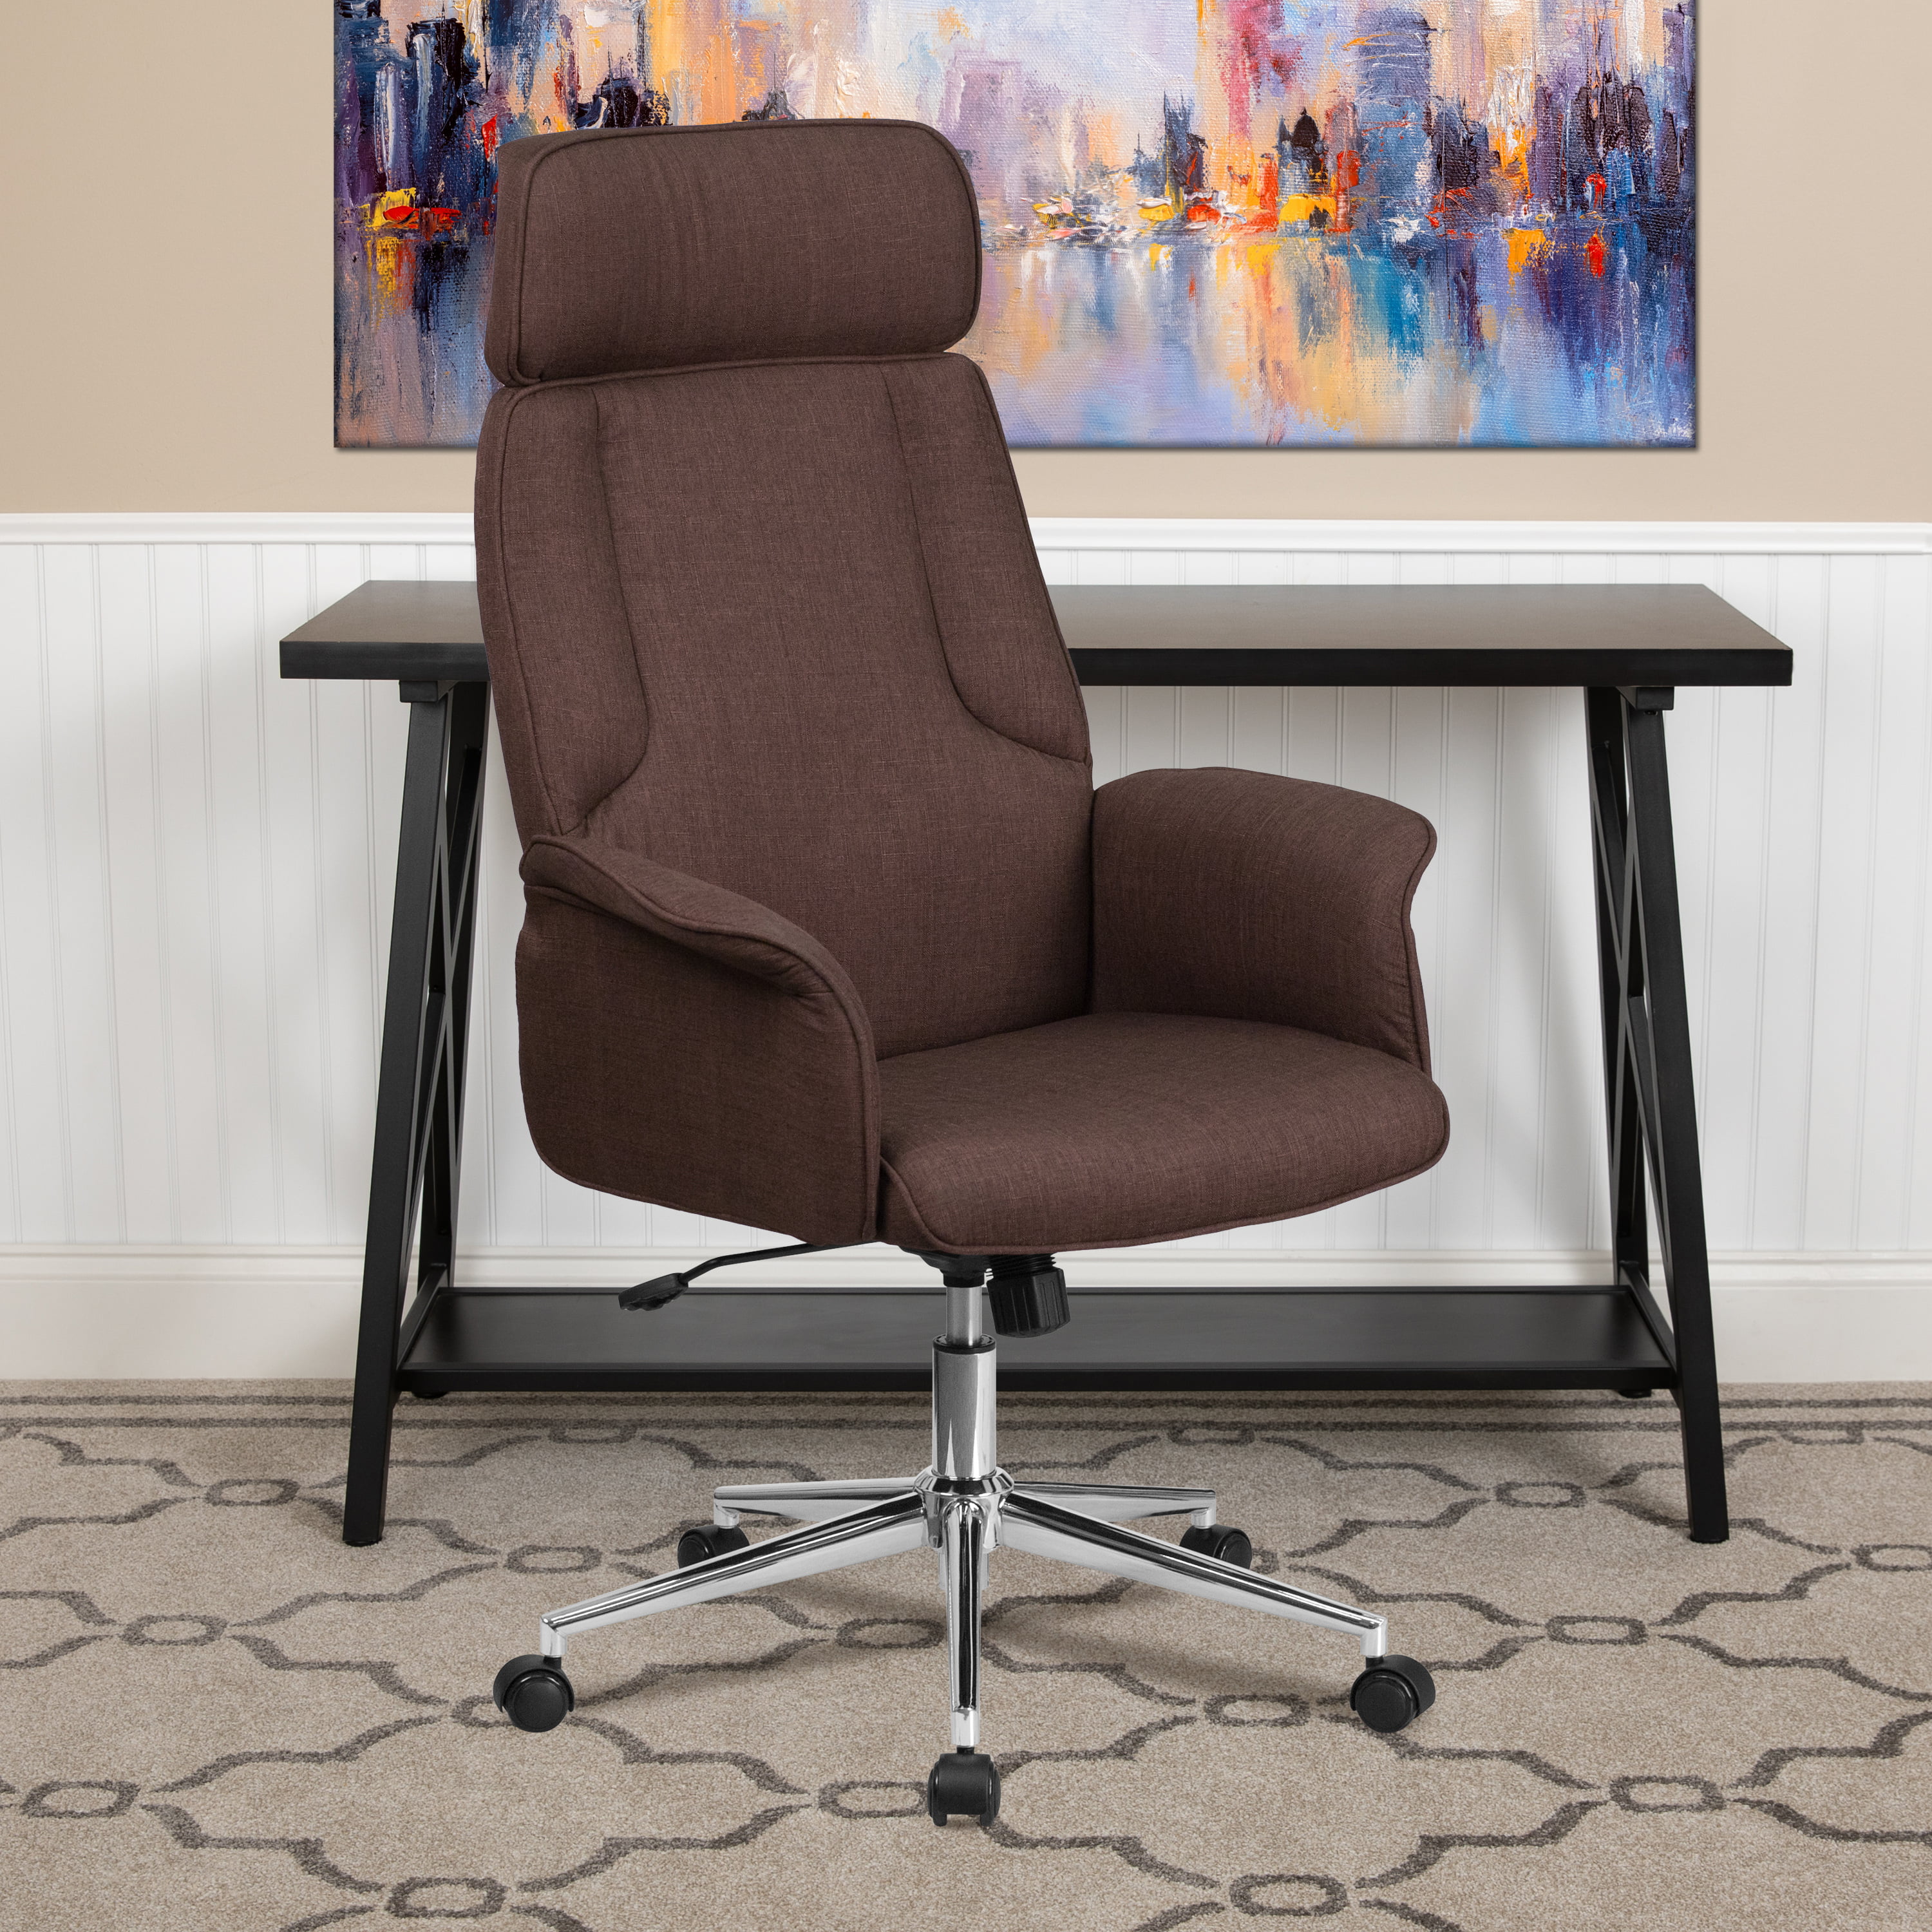 Details about   Erogonomic Black Executive Lumbar Stitched Leather Swivel Tilting Office Chair 